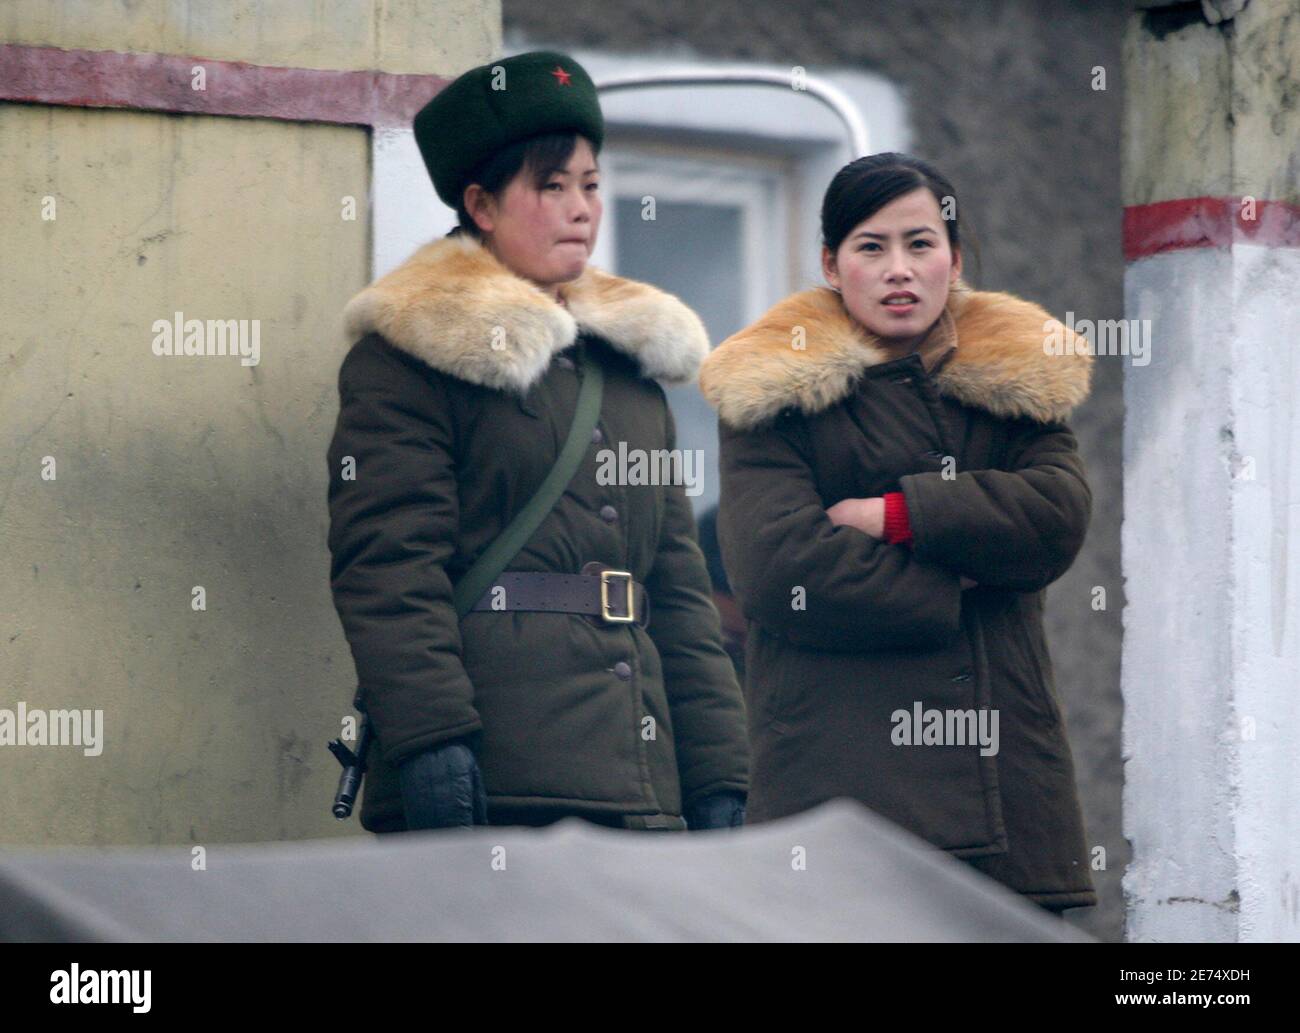 North Korean soldiers guard the bank of Yalu River near the North Korean town of Sinuiju, opposite the Chinese border city of Dandong, December 11, 2009. North Korea indicated on Friday it was ready to end its year-long boycott of nuclear negotiations, following talks in the reclusive state this week with a U.S. envoy to try to revive a disarmament-for-aid deal. REUTERS/Jacky Chen (NORTH KOREA POLITICS MILITARY) Stock Photo